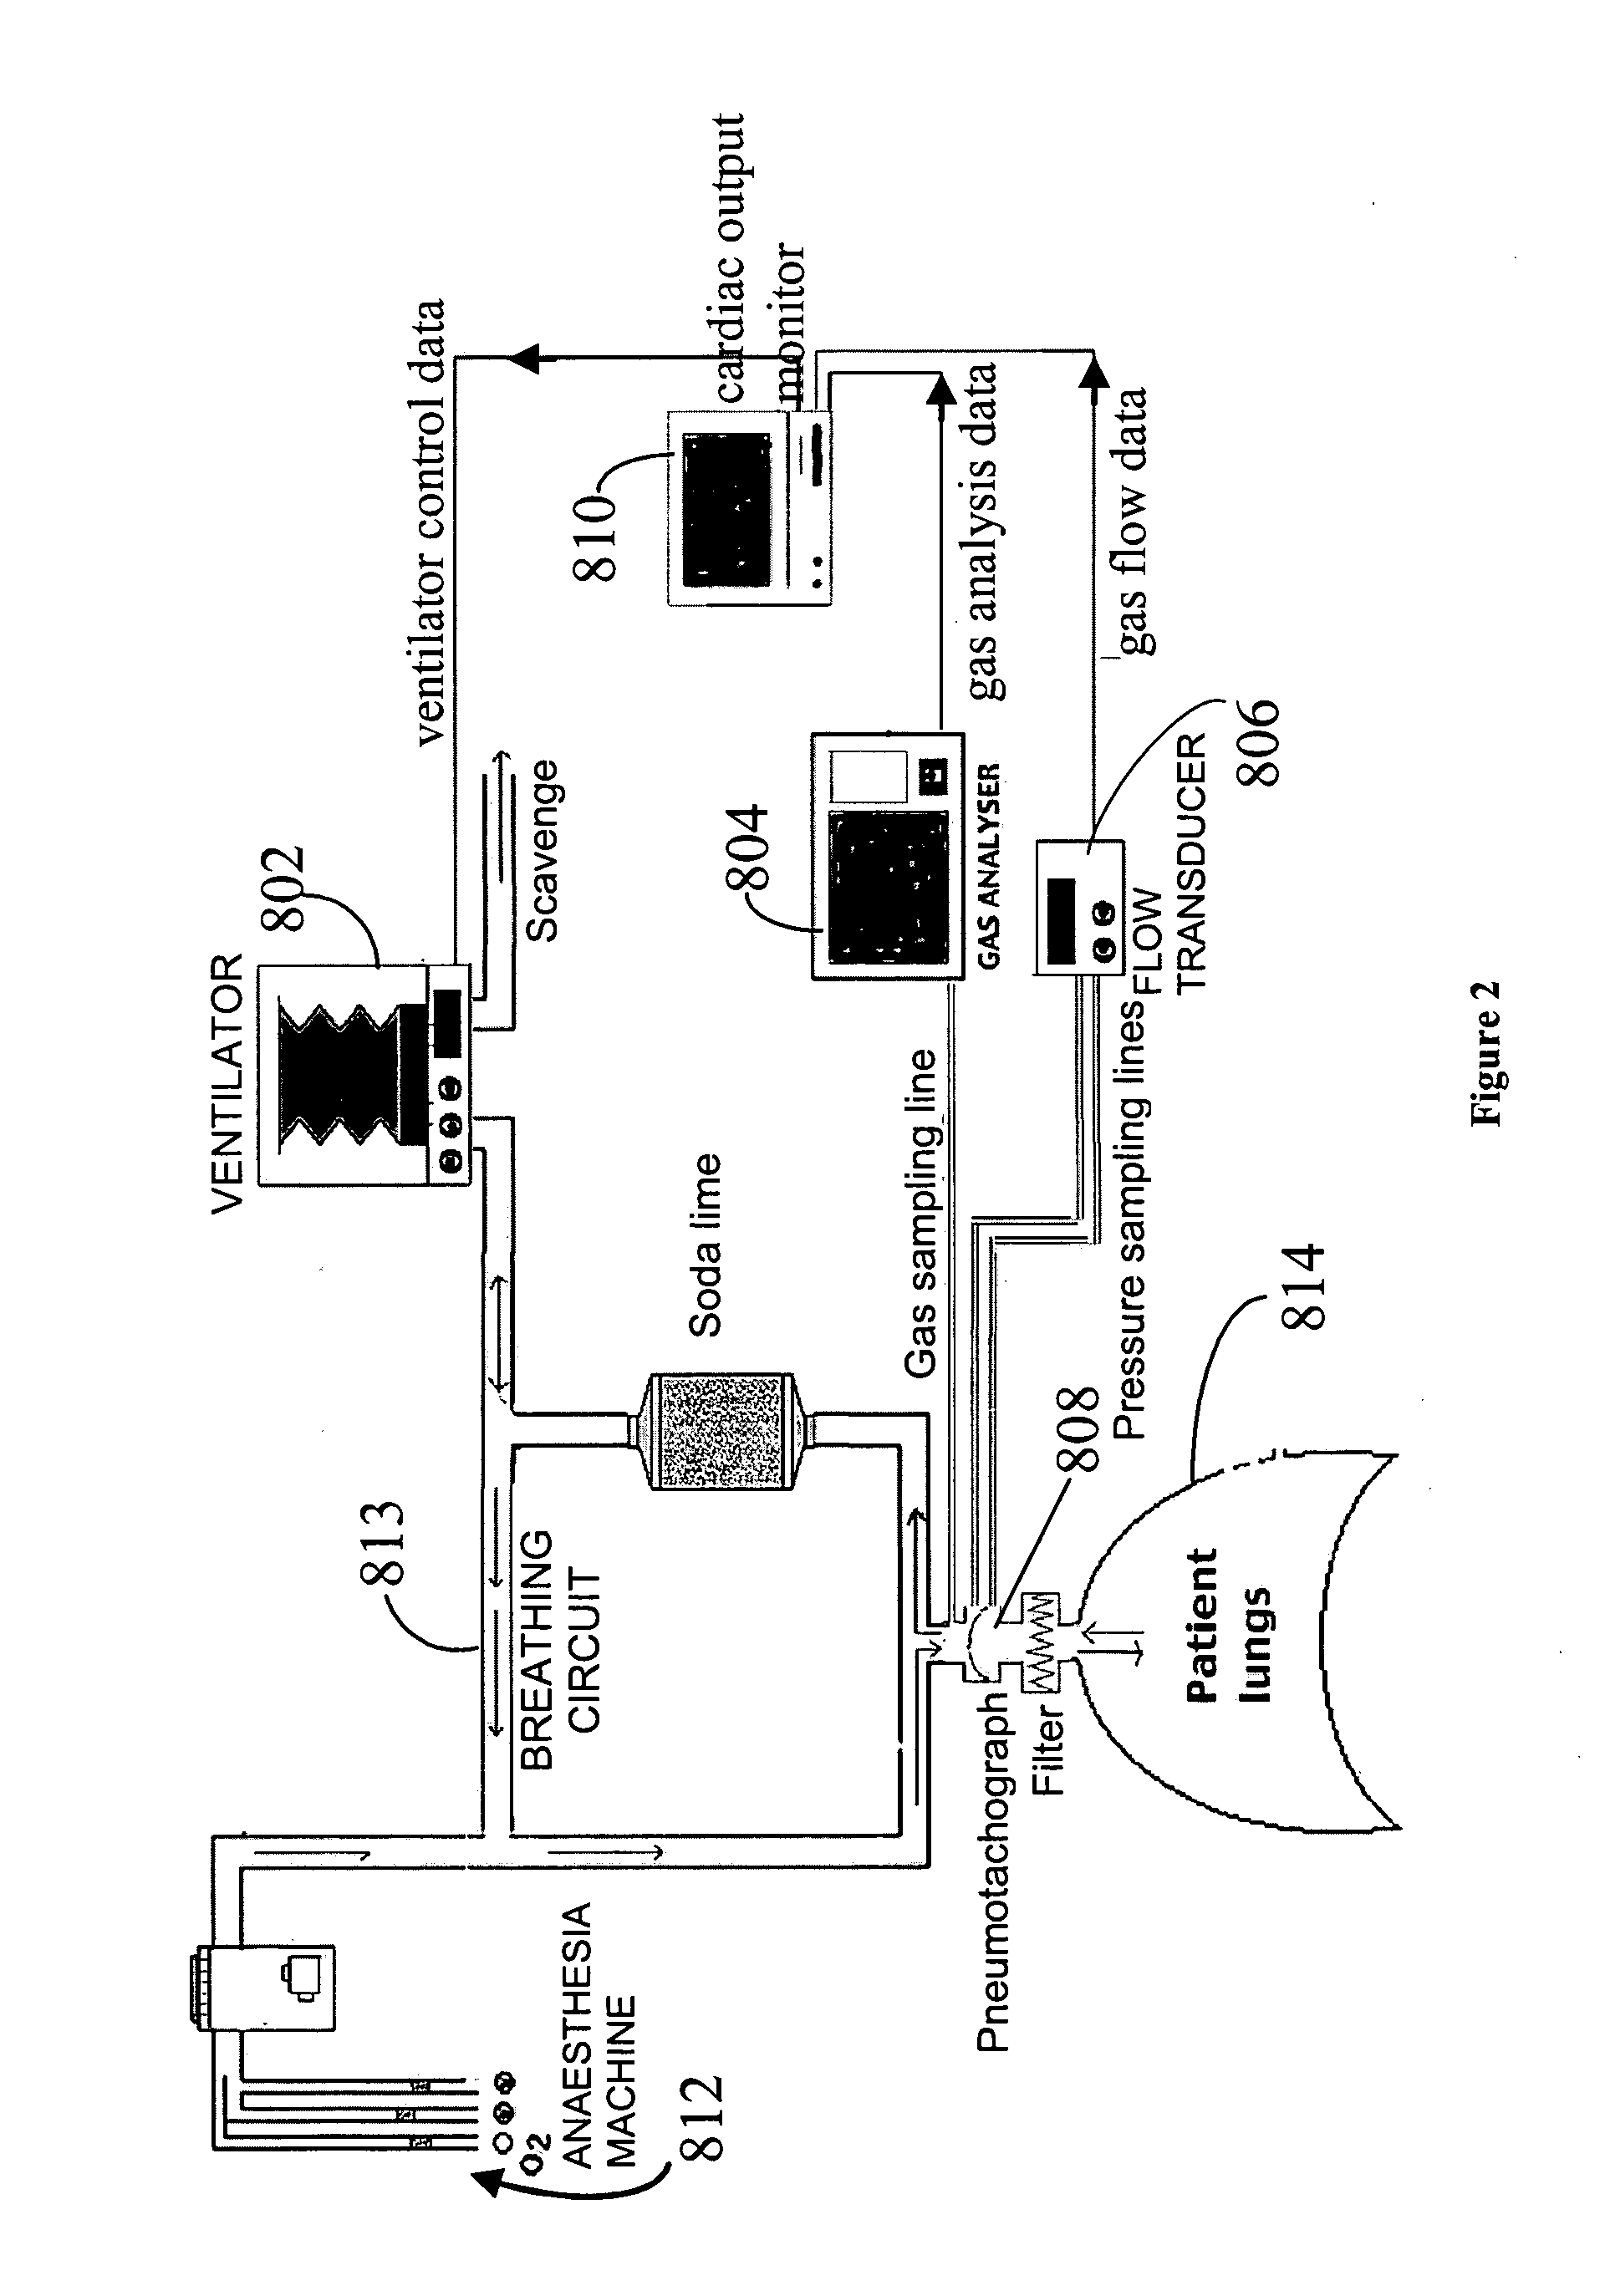 System and method for monitoring cardiac output